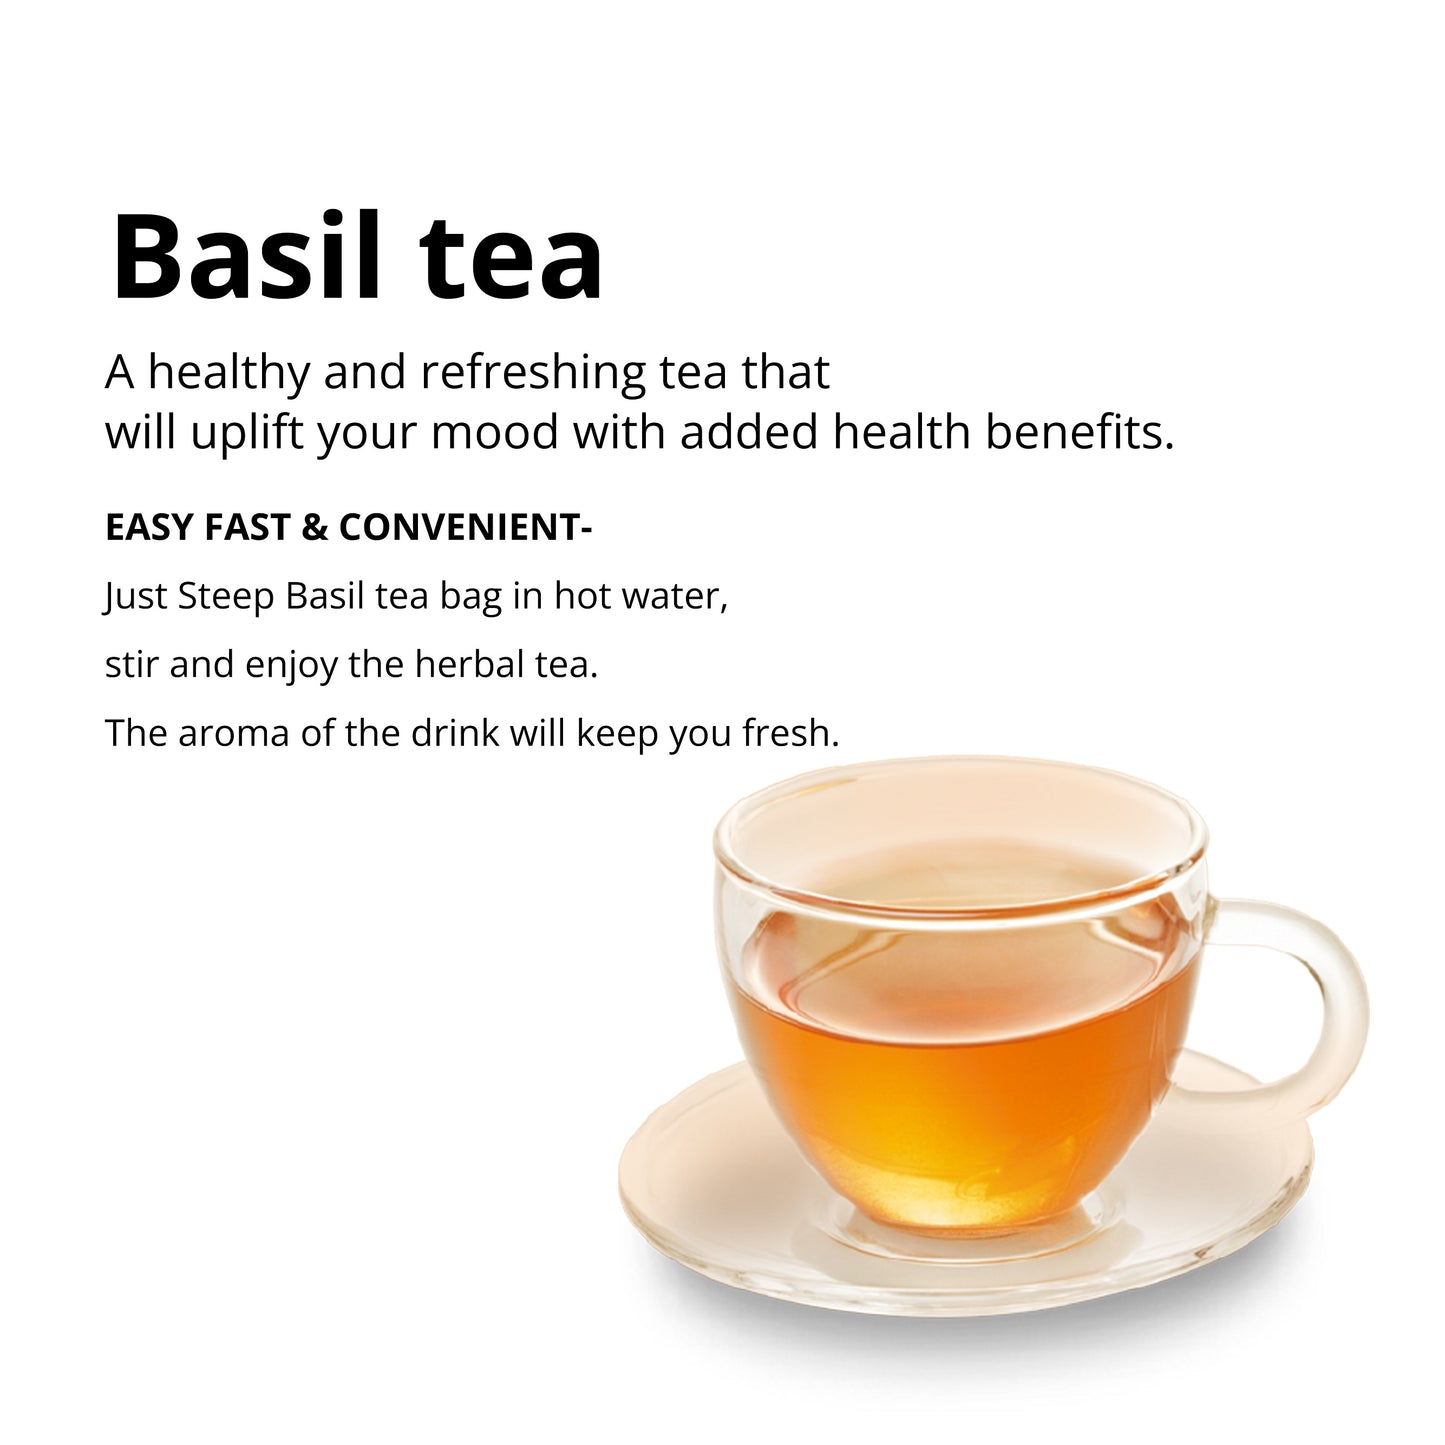 
                  
                    Basil tea . A healthy and refreshing tea that will uplift your mood with added health benefits. EASY FAST & CONVENENT. Just Steep basil tea bag in hot water, stir and enjoy the herbal tea. The aroma of the drink will keep you fresh. Organic Tulsi Tea Tulsi Leaves Organic Herbal teas tulsi spice dried holy basil leaves loose leaf tea natural stress relief tulsi stress relieving tulsi basil energizing tulsi basil tea dried Tulsi immunity booster medicinal herb adaptogenic tea
                  
                